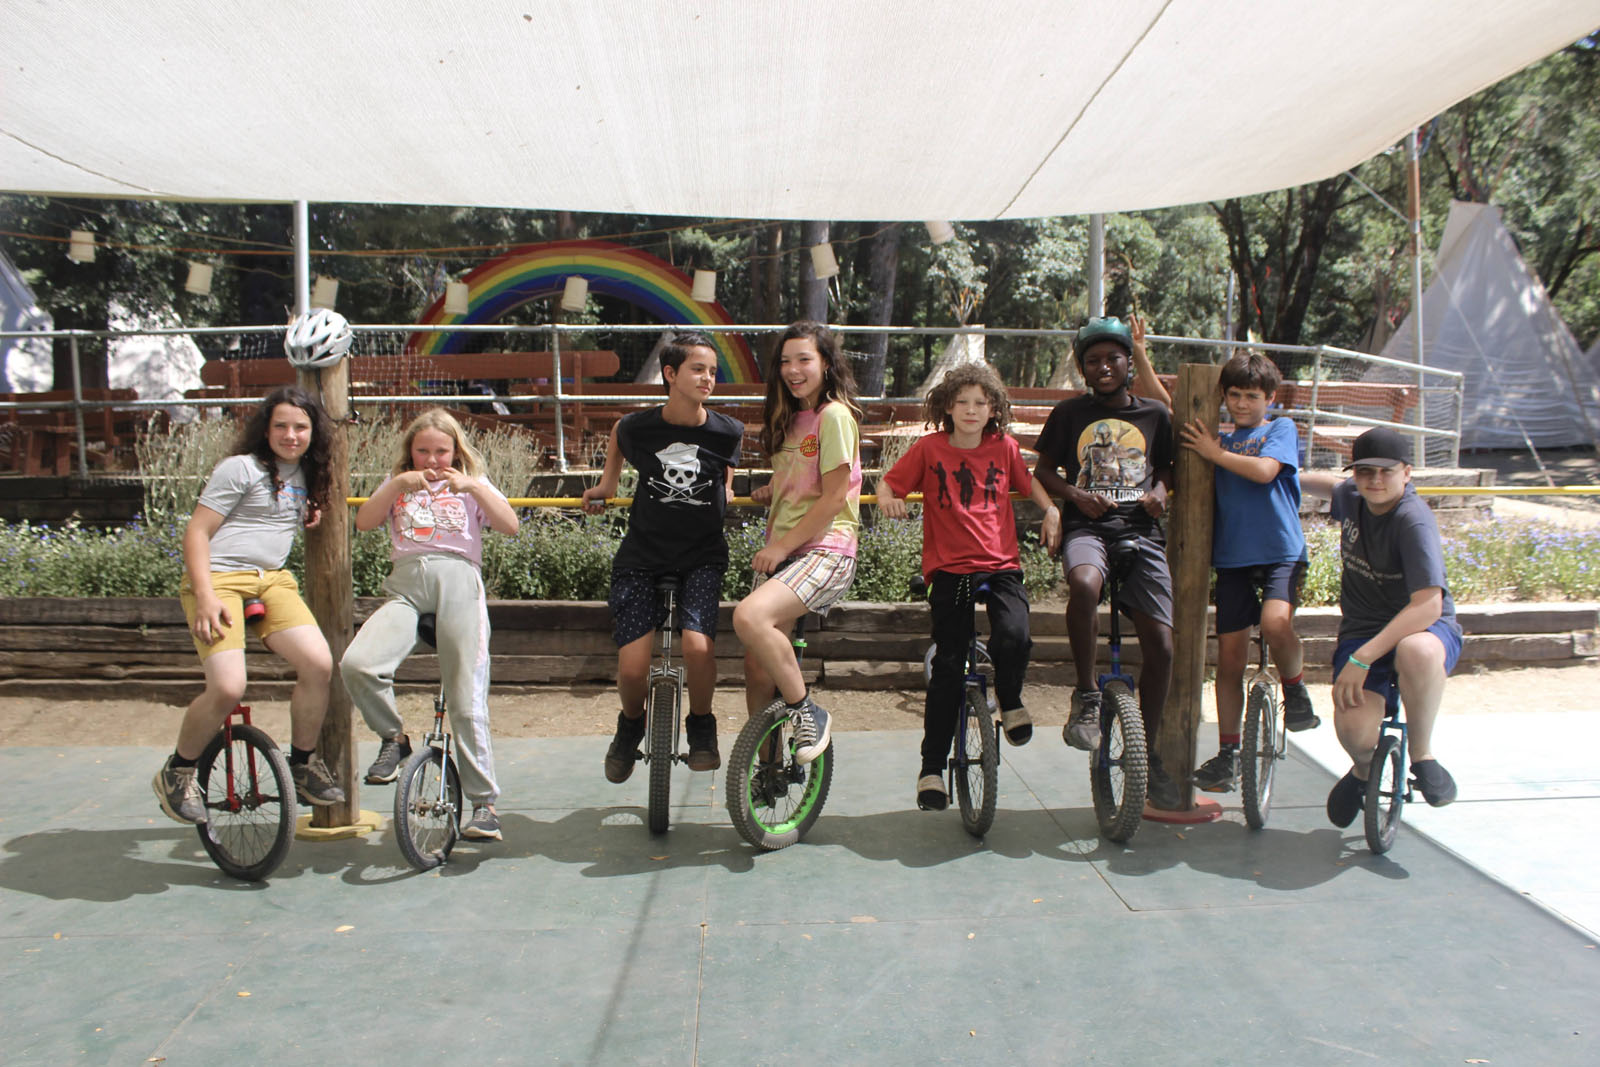 Campers on unicycles